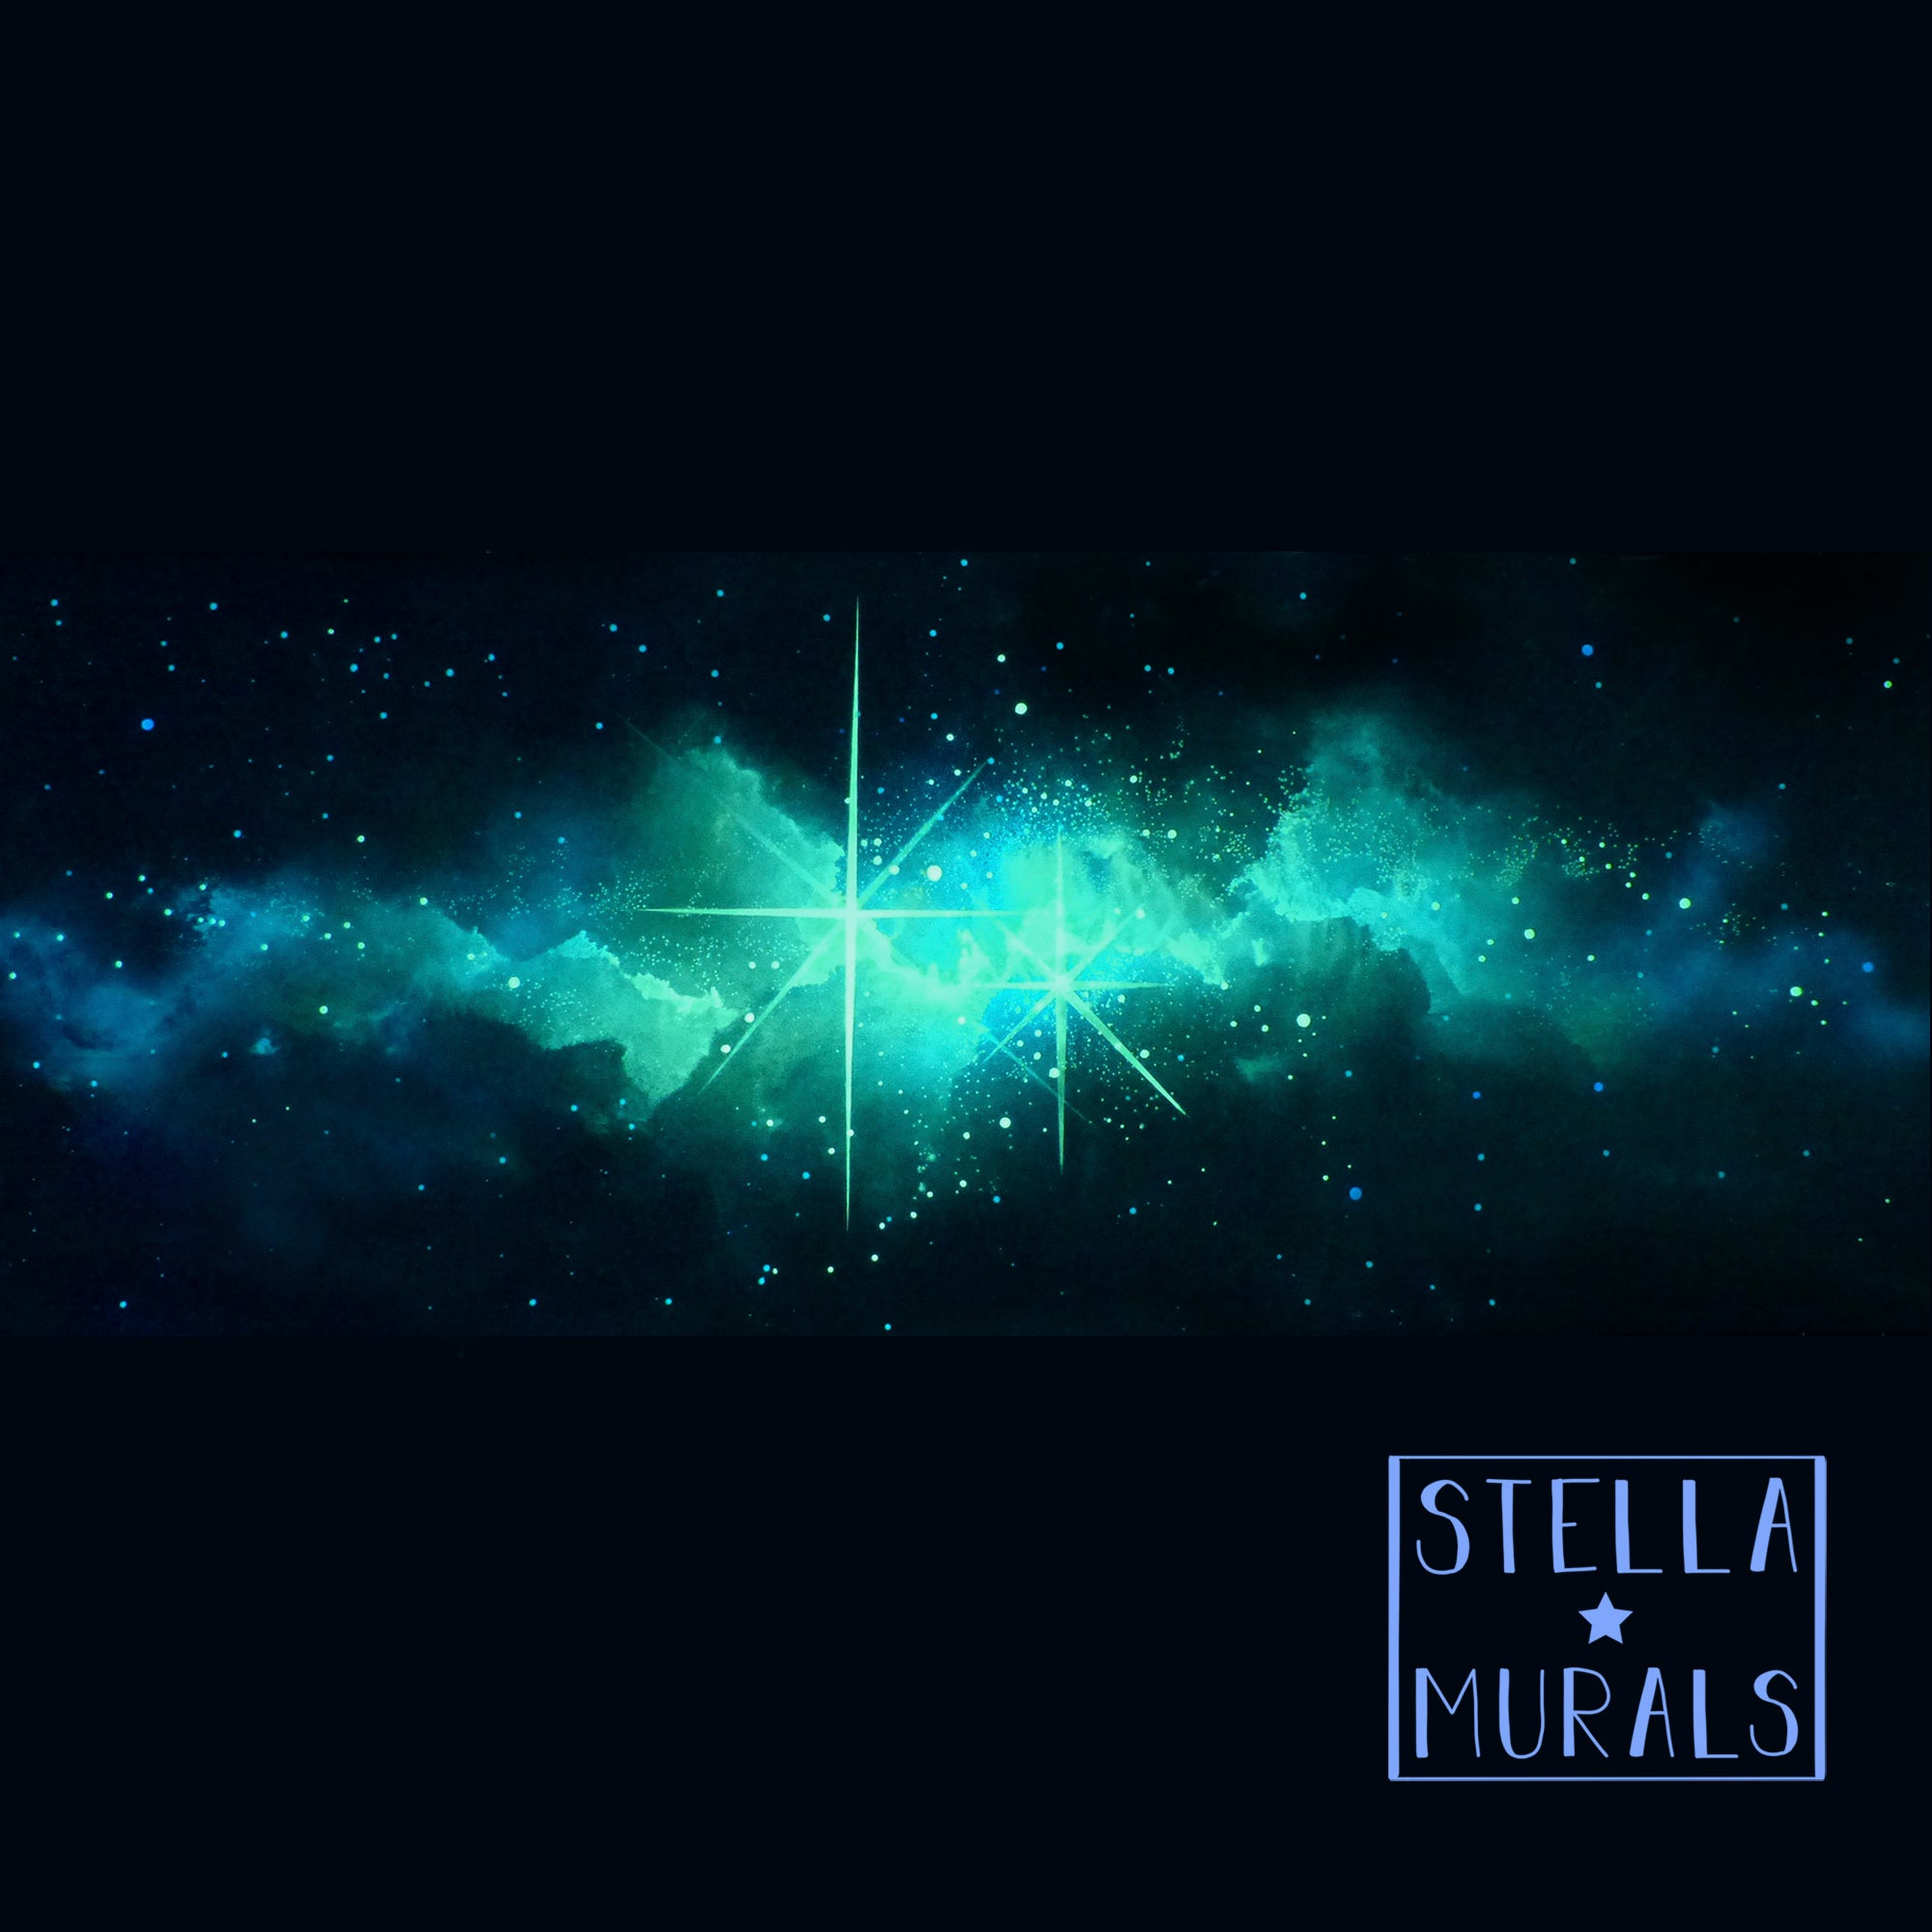 glow in the dark nebula and stars decal for bedroom wall